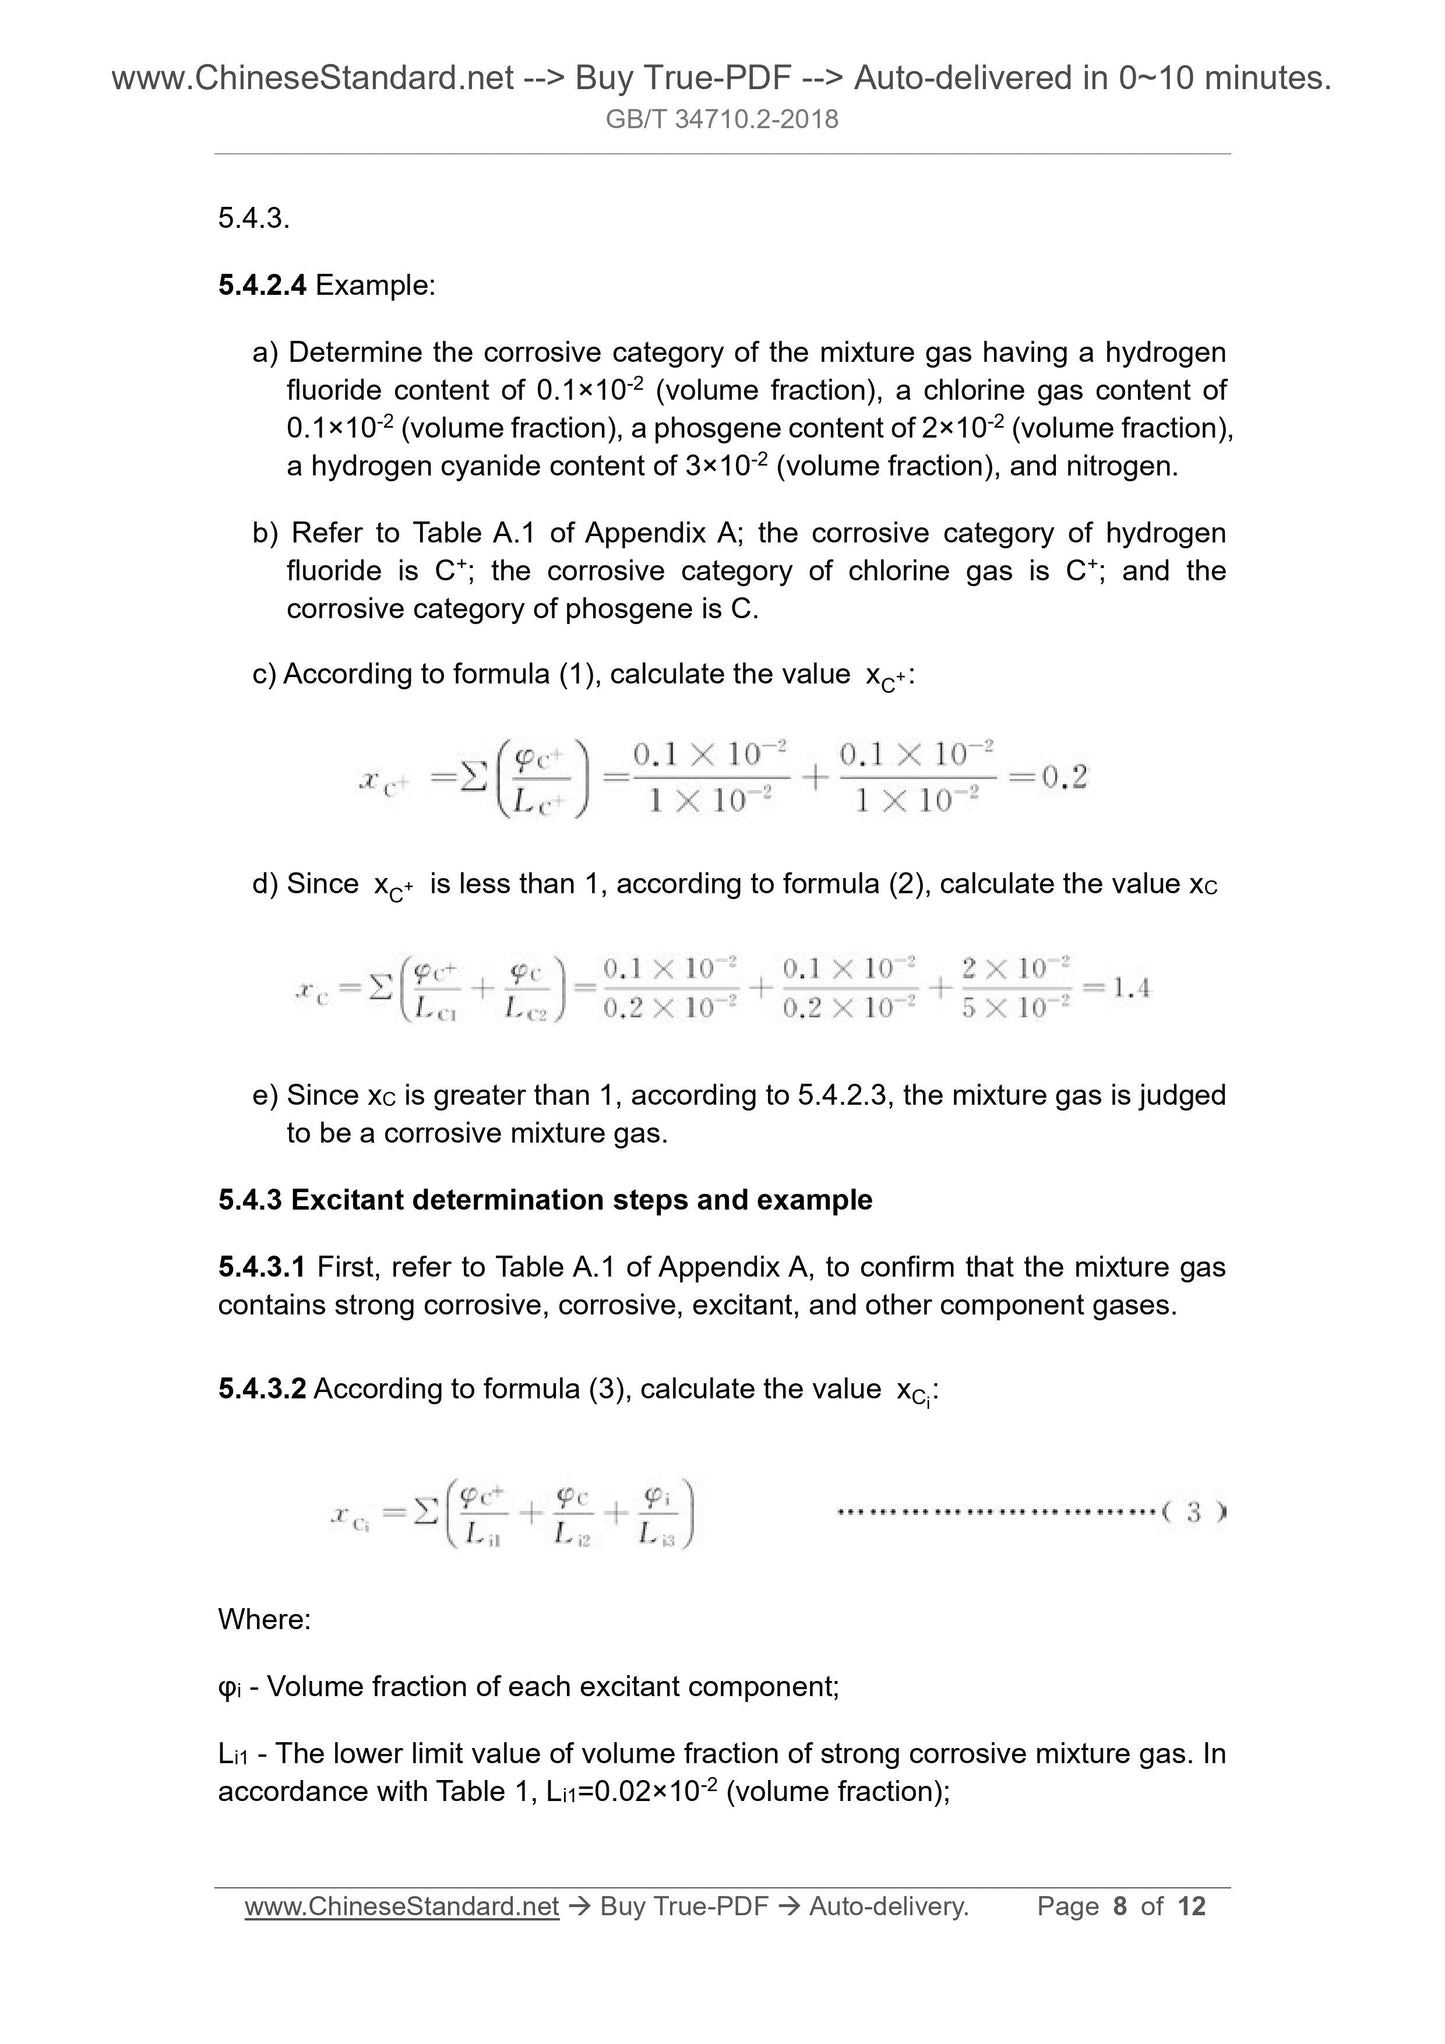 GB/T 34710.2-2018 Page 5